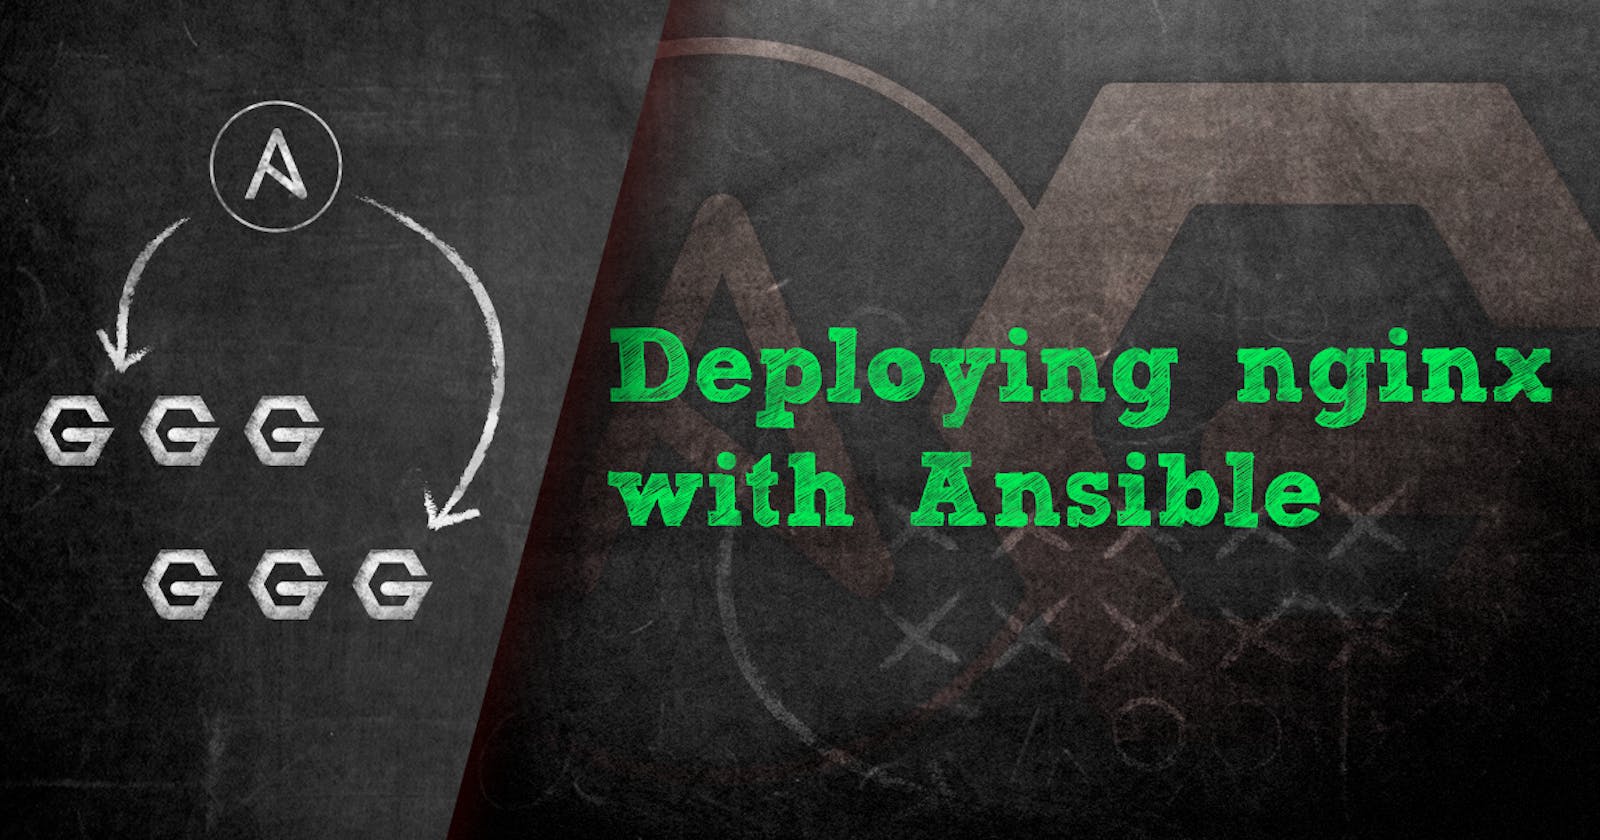 How to Install Nginx and Deploy a Simple Webpage Using Ansible